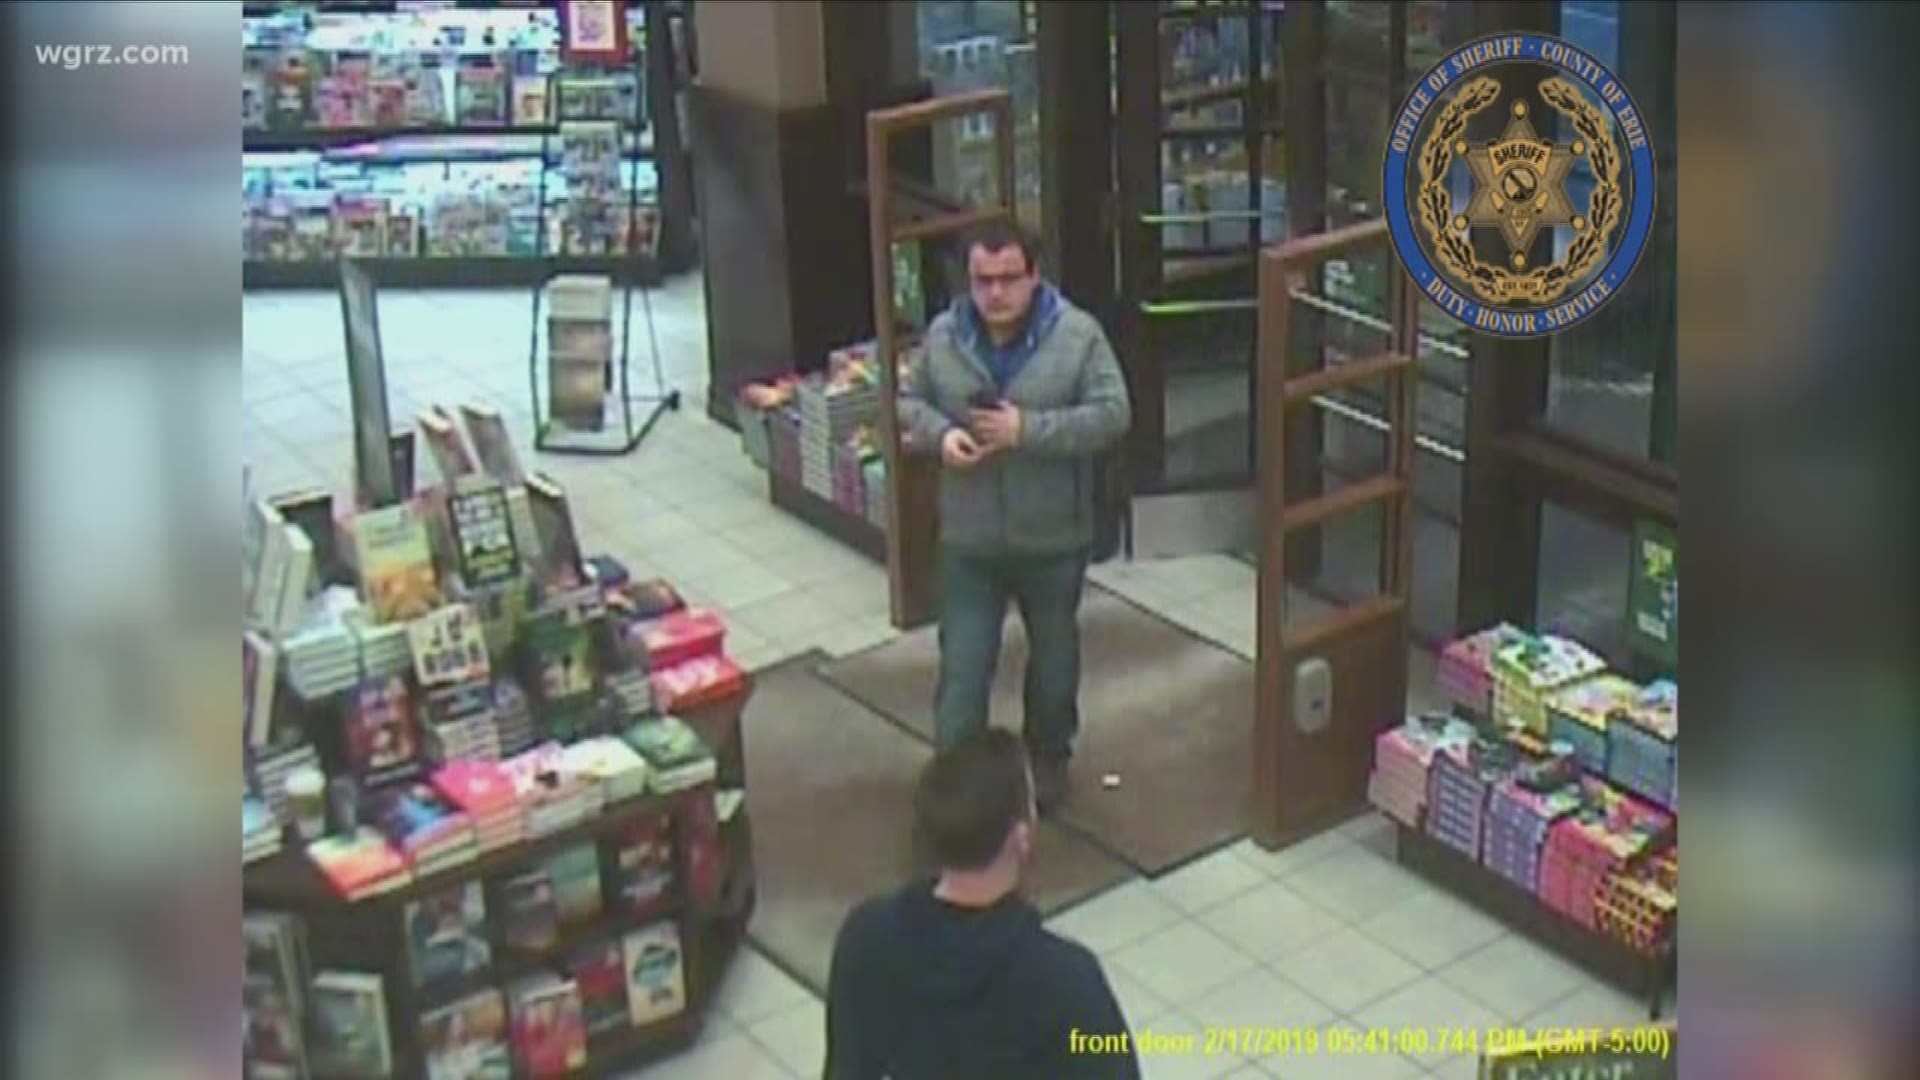 Police look to identify book thief